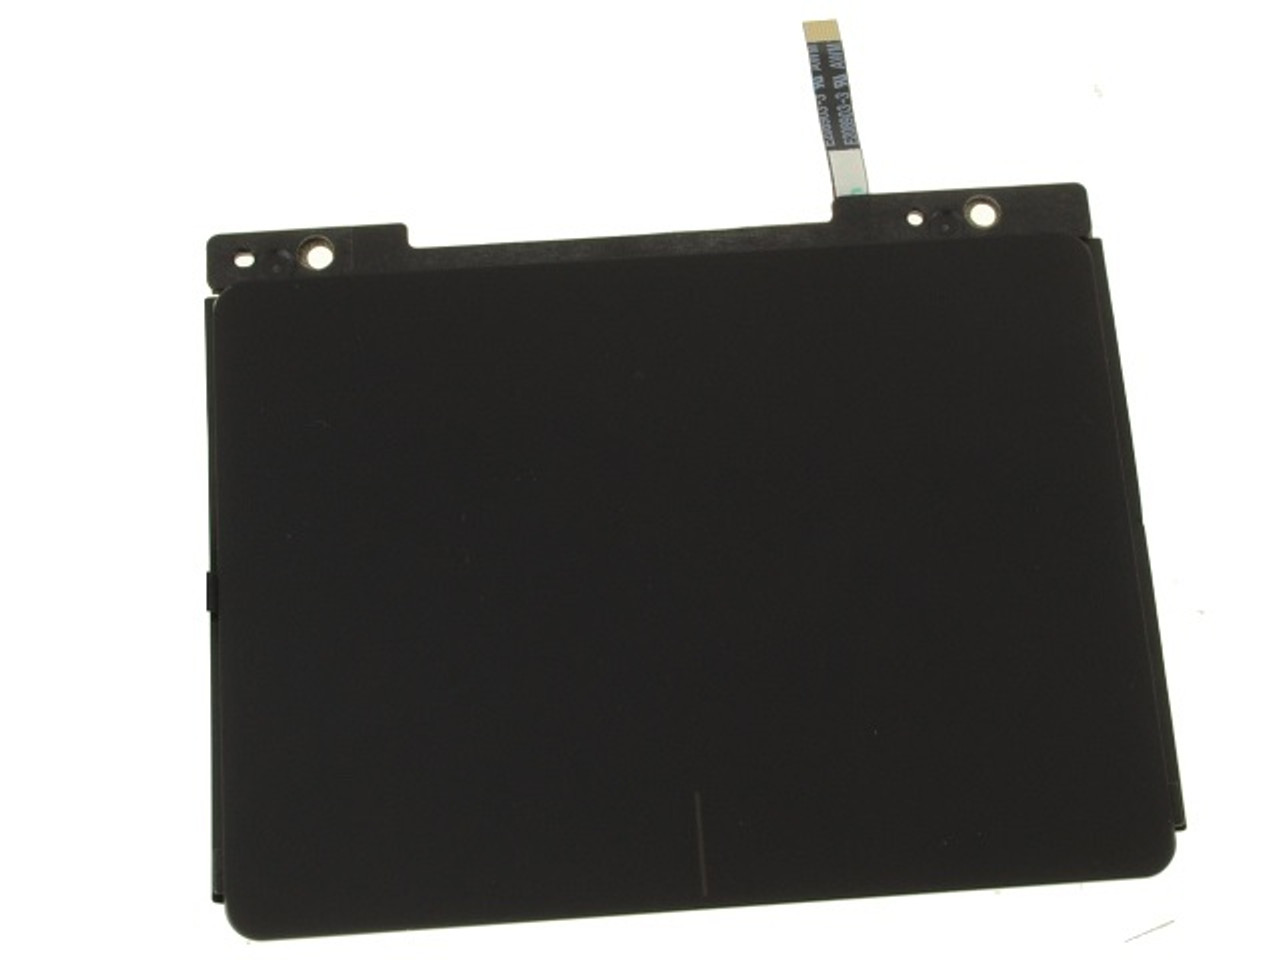 Dell XPS 15 (9530) Precision M3800 Touchpad Sensor Assembly w/ cable - 2HFGW